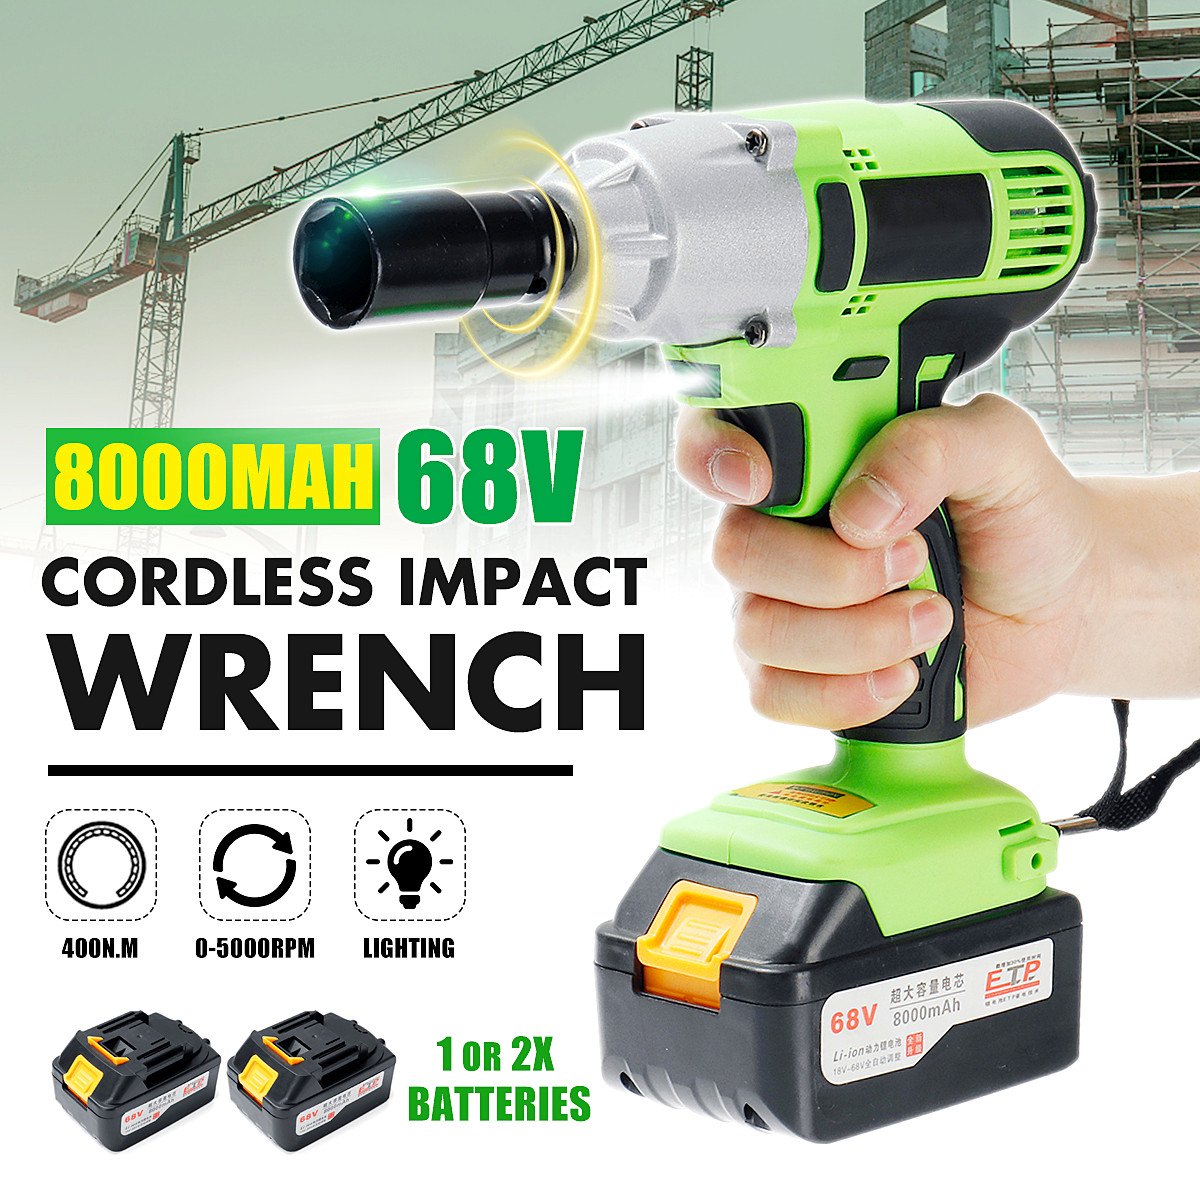 68V-Cordless-Lithium-Ion-Electric-Impact-Wrench-1420496-1